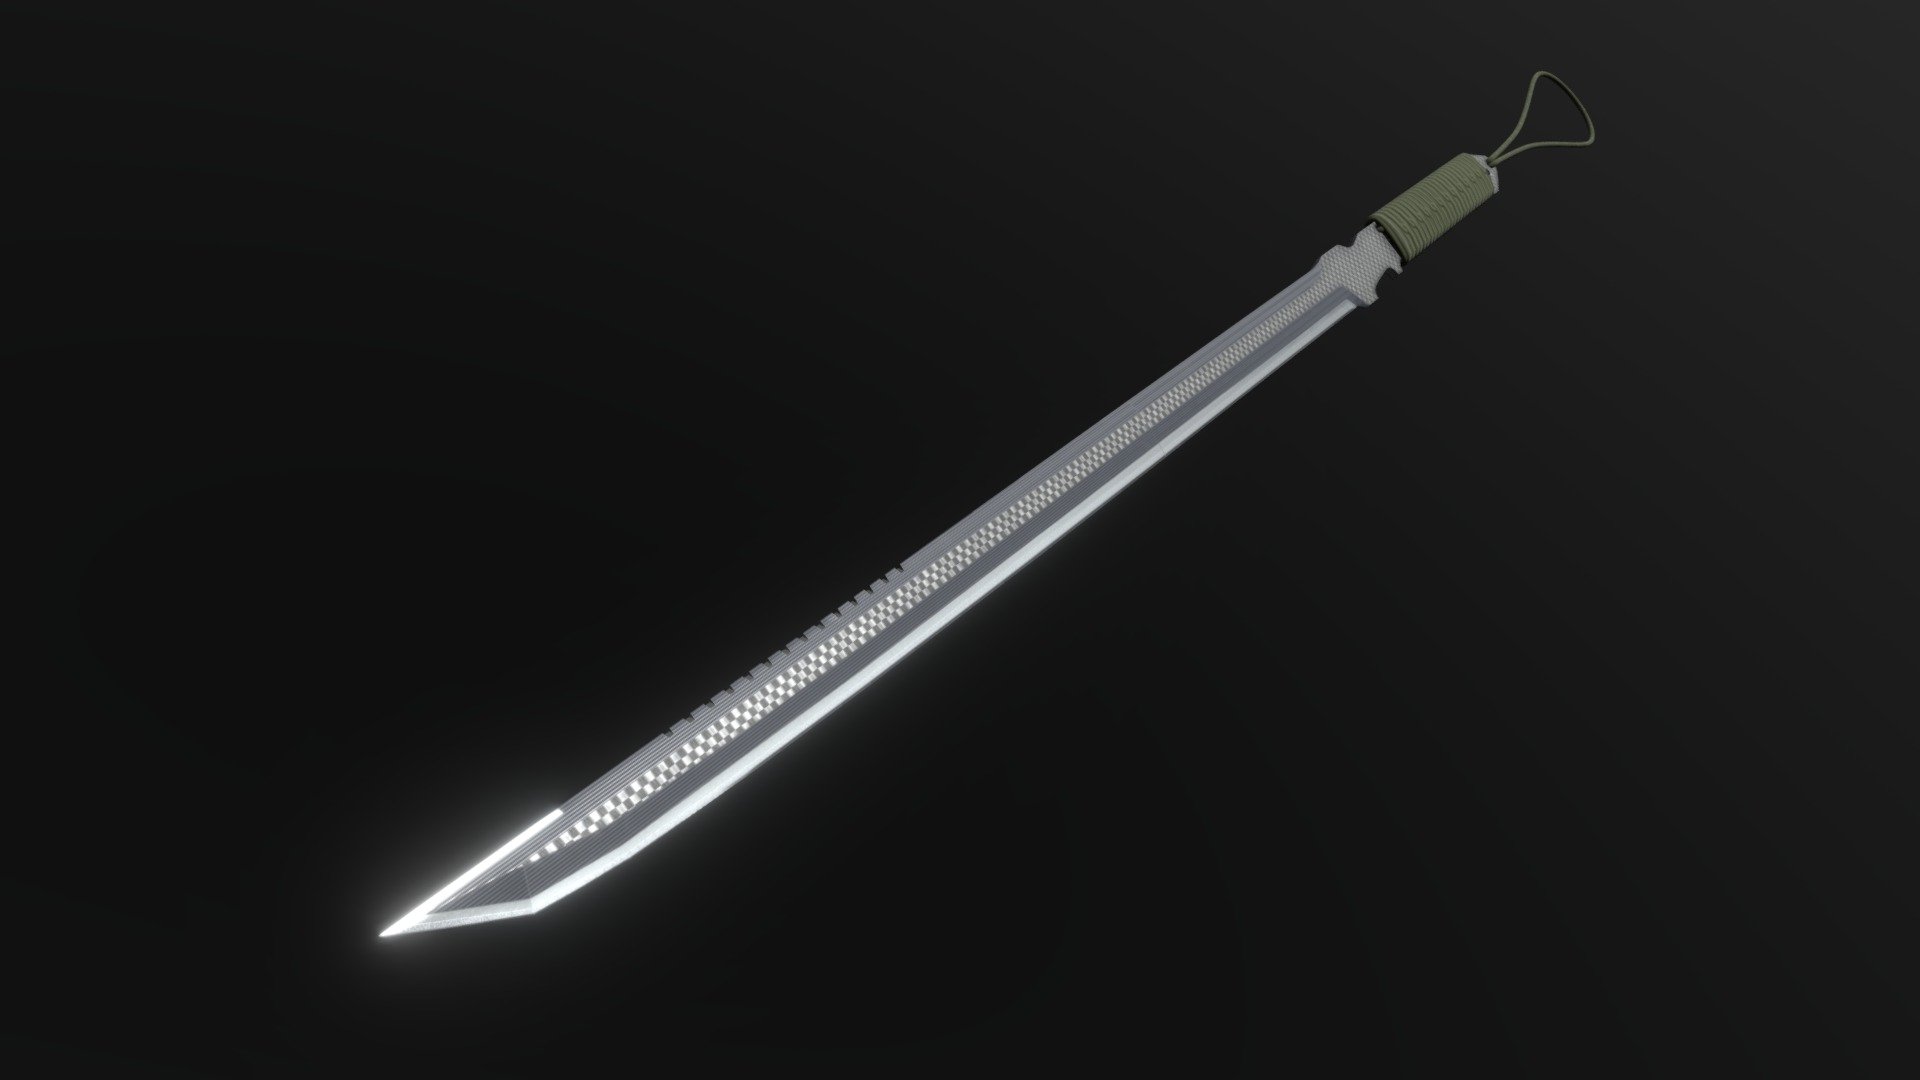 Modern looking sword from Metal Gear Solid 4 / Metal Gear Rising: Revengeance (R-00 chapter)

made it proportionally longer than in-game version for cooler appearance

textures are not final, thinking how to inprove the &ldquo;checker